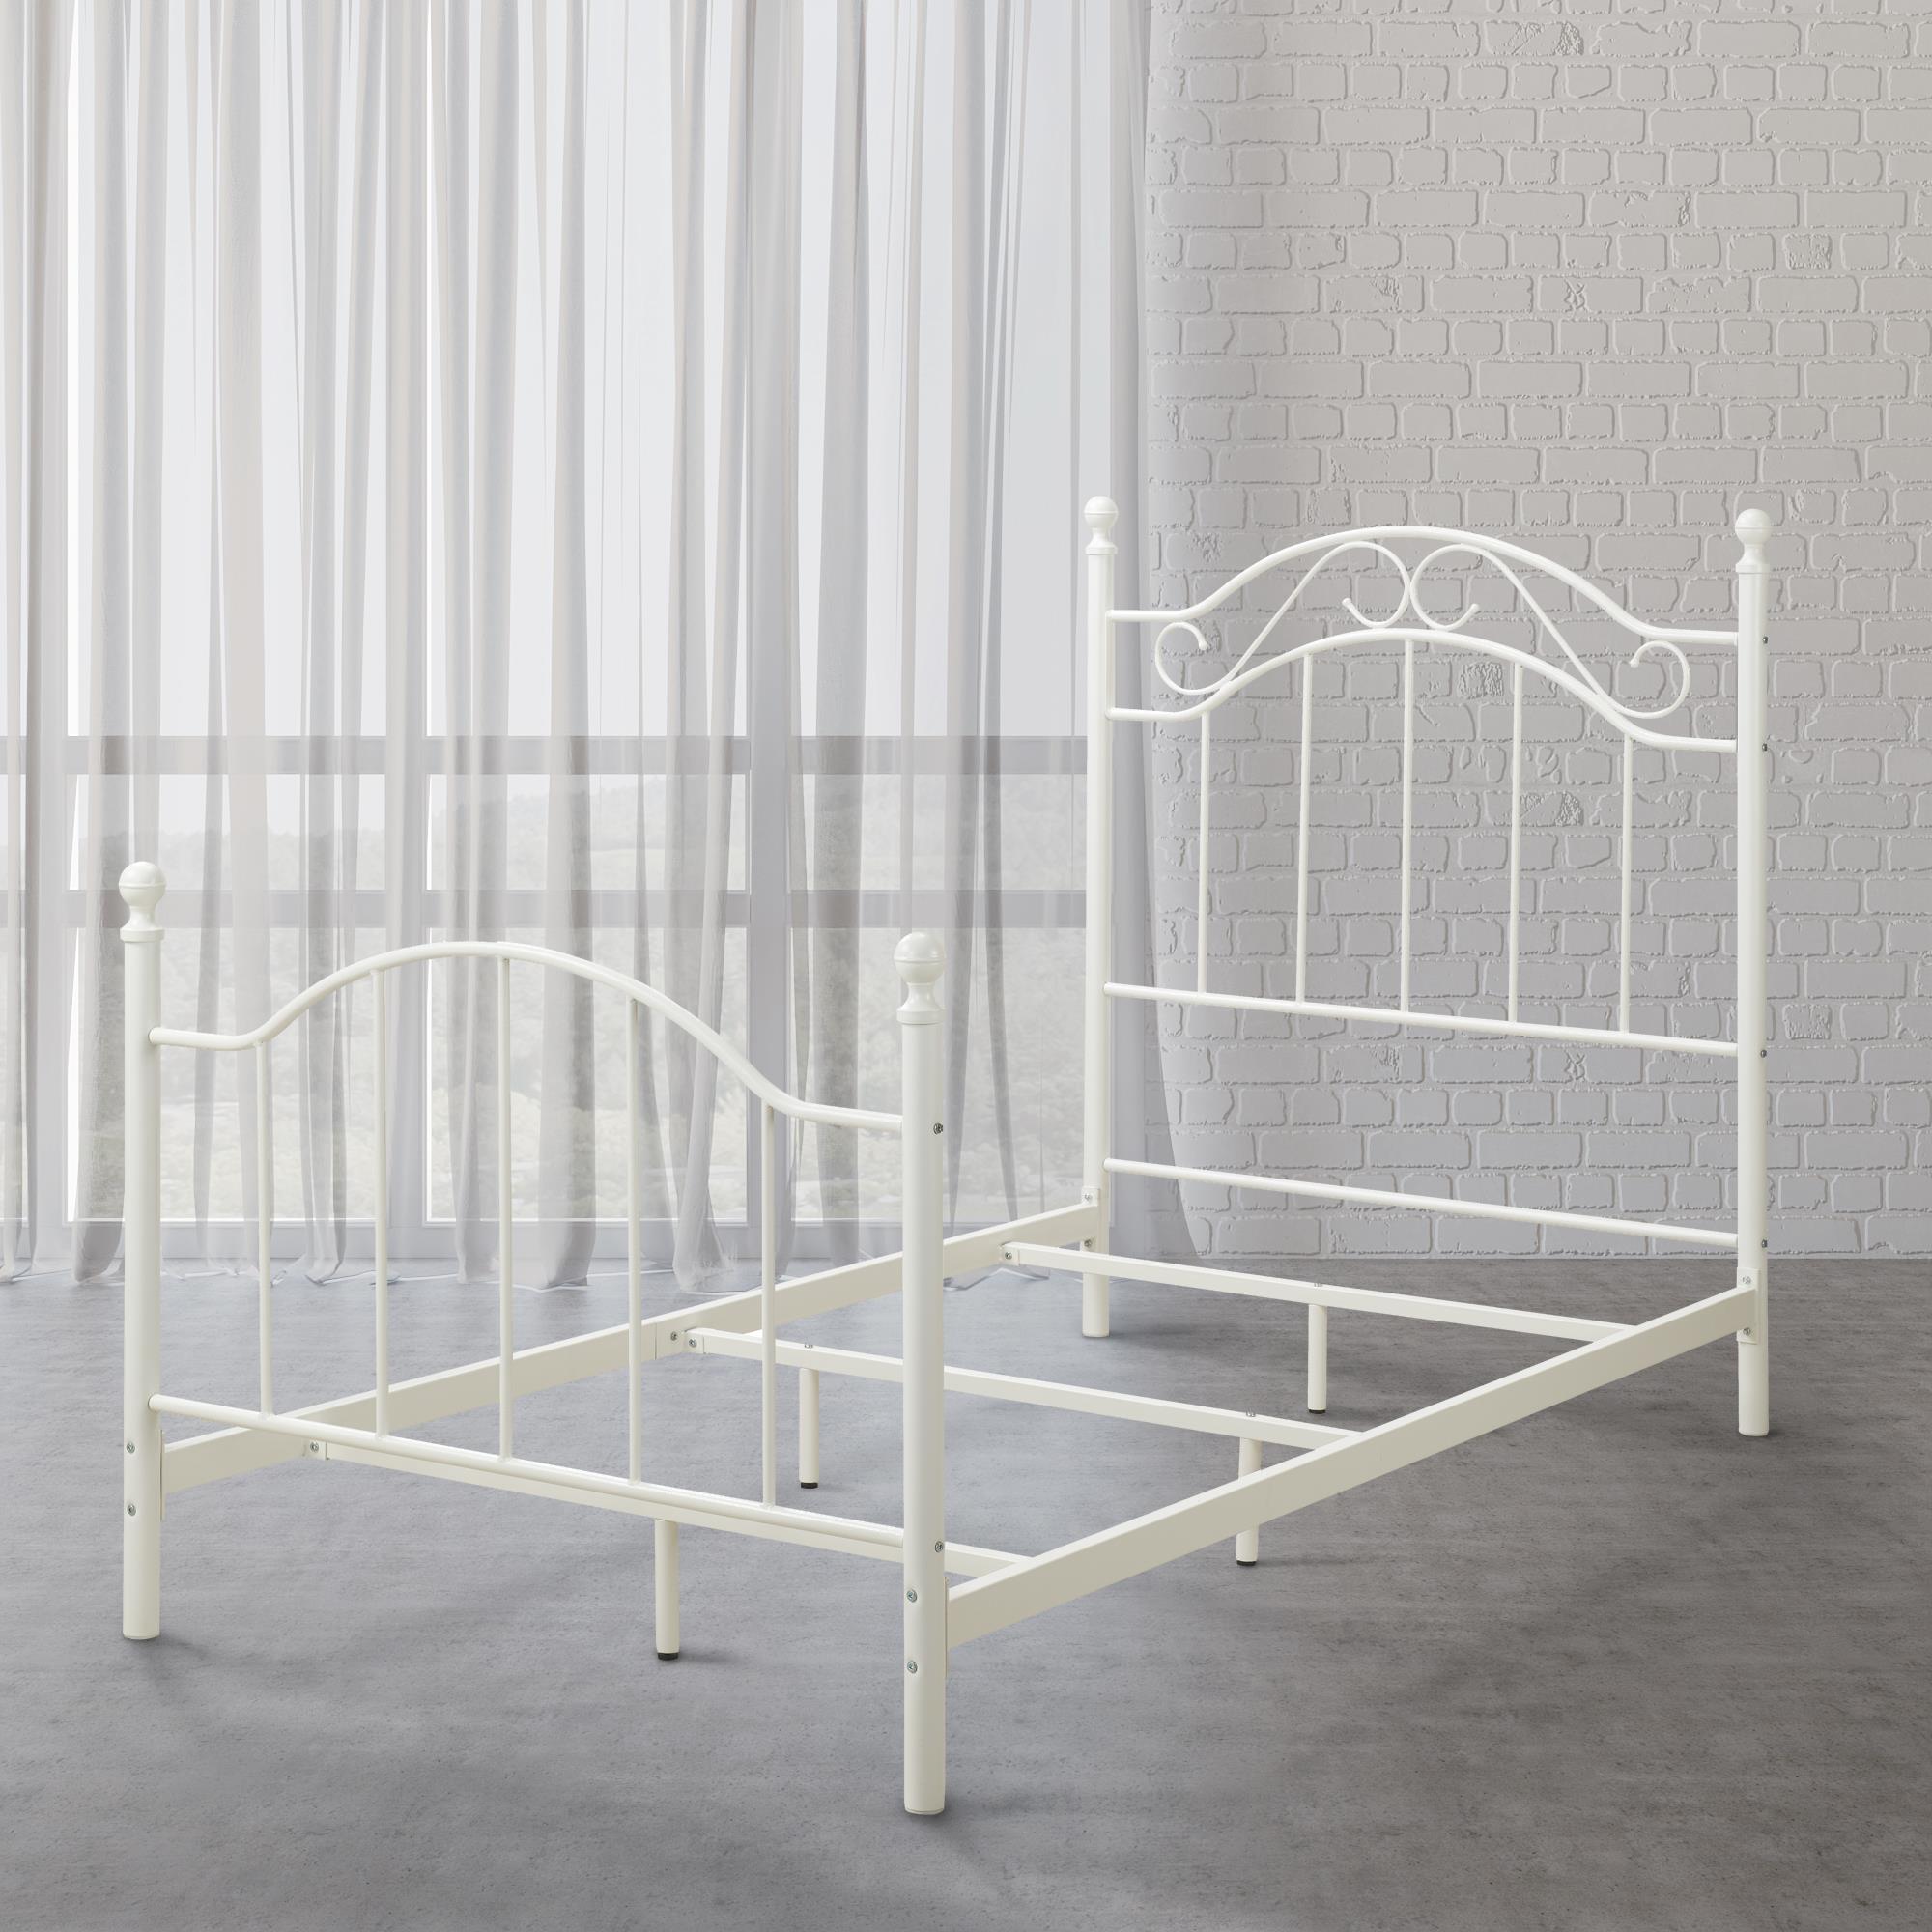 Mainstays Metal Bed, Bedroom Furniture, Twin Size Frame, White - image 2 of 16